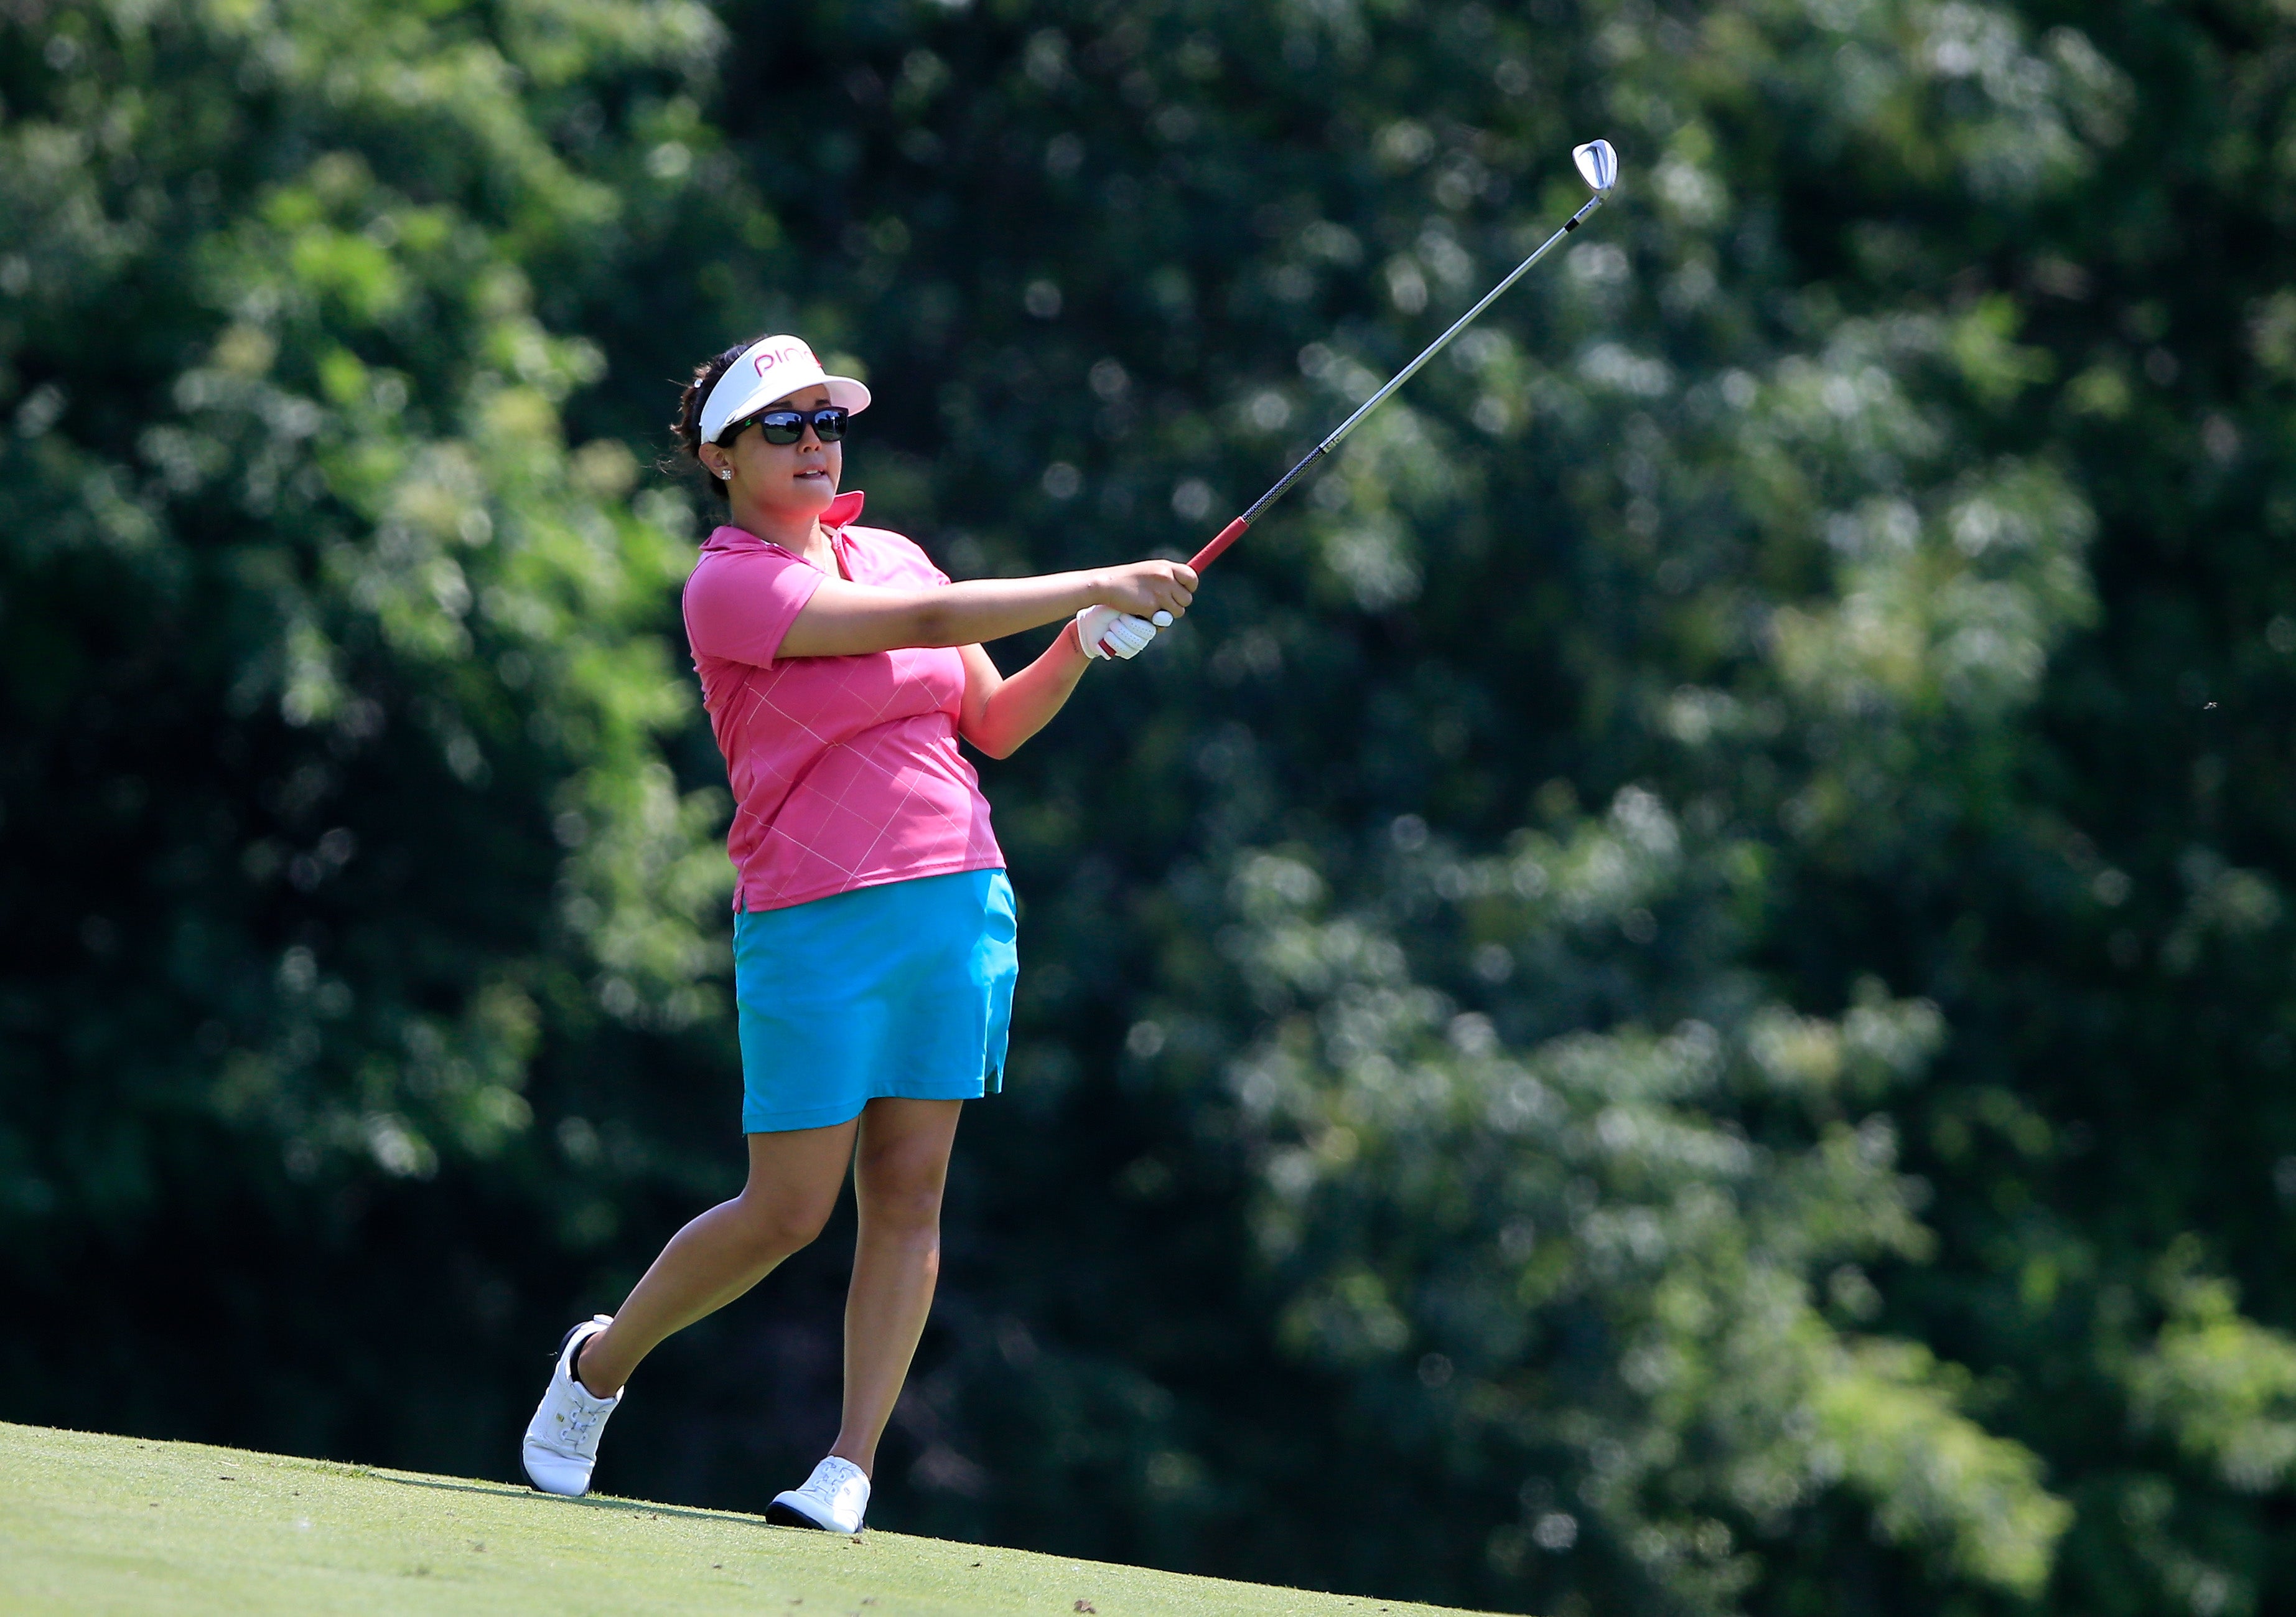 LPGA vet Jane Park on life after golf, being married to a caddie